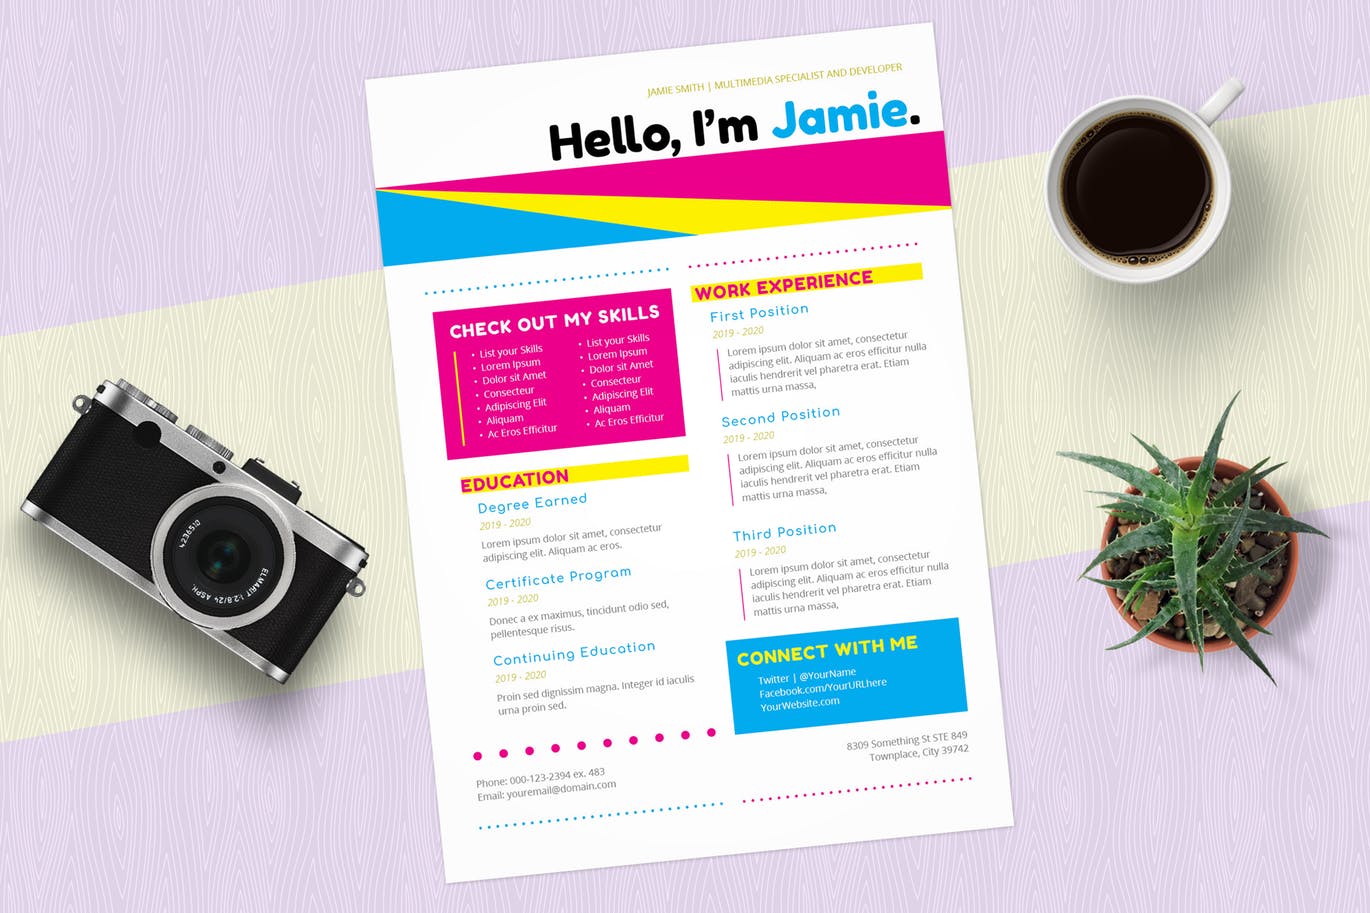 CMYK多彩风格InDesign简历模板 InDesign Resume Template (Colorful CMYK)插图